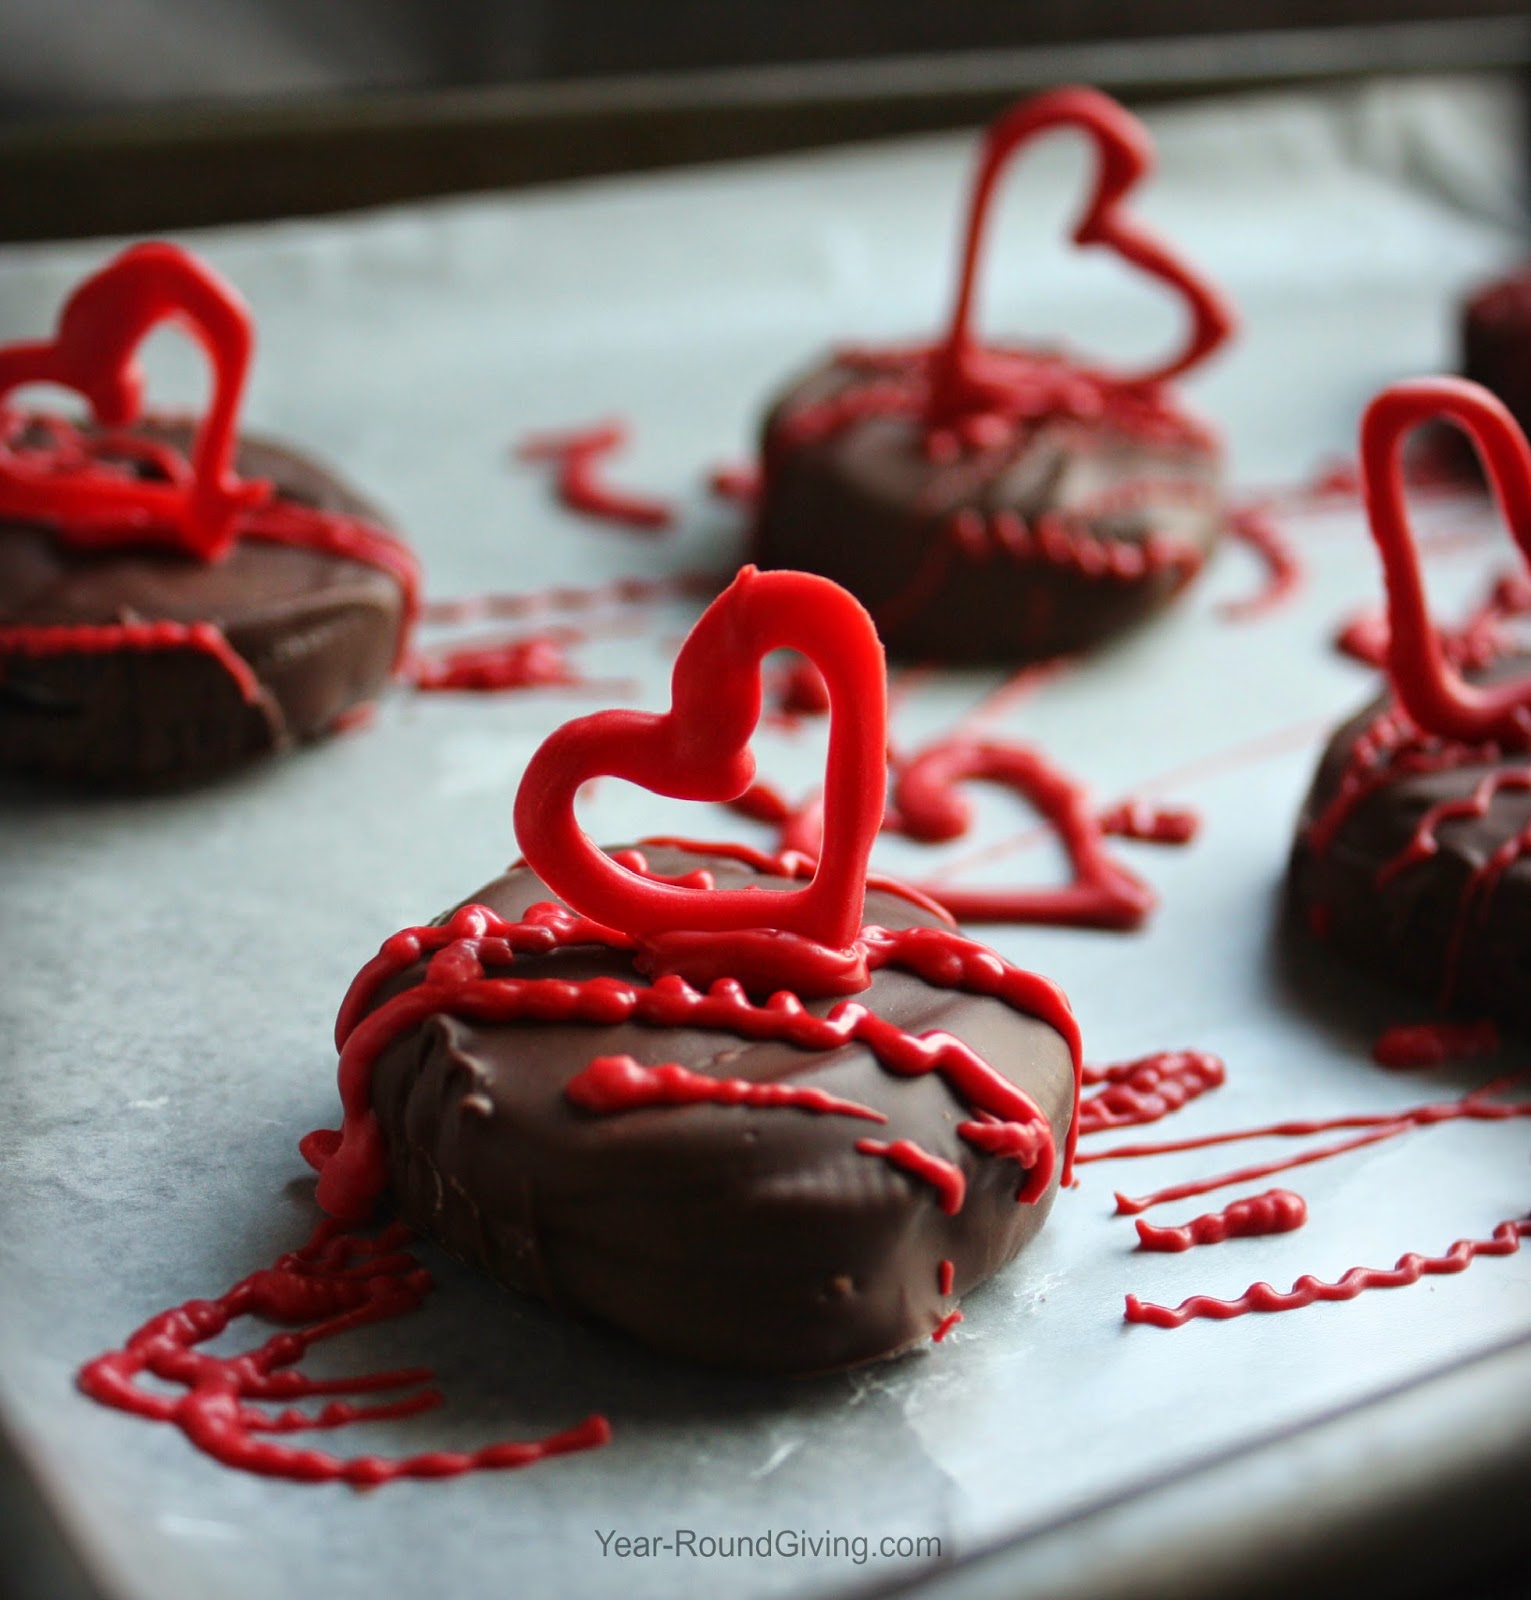 Chocolate Covered Candy Heart OREOs